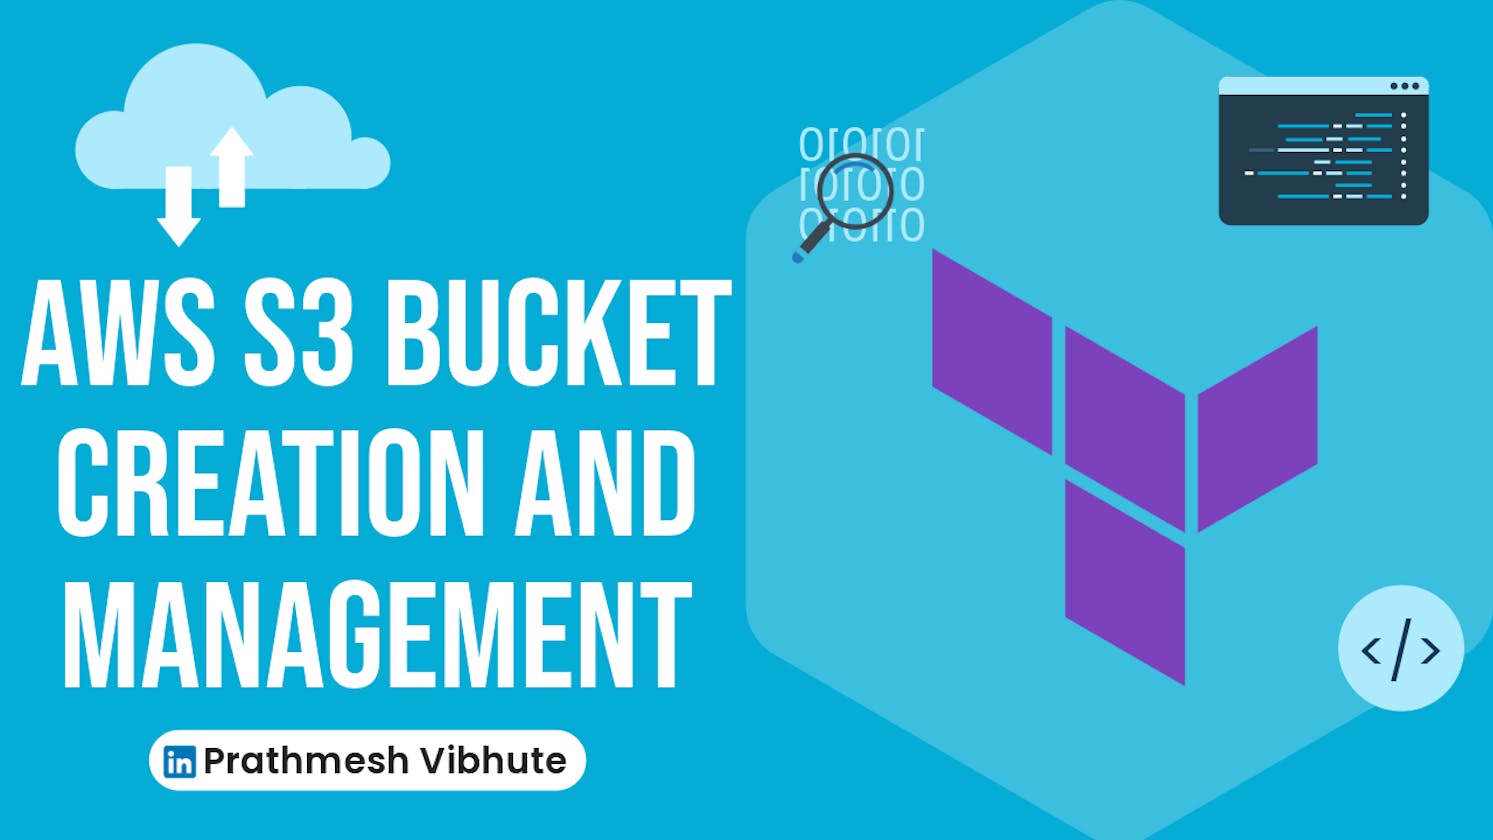 Day 67 : AWS S3 Bucket Creation and Management